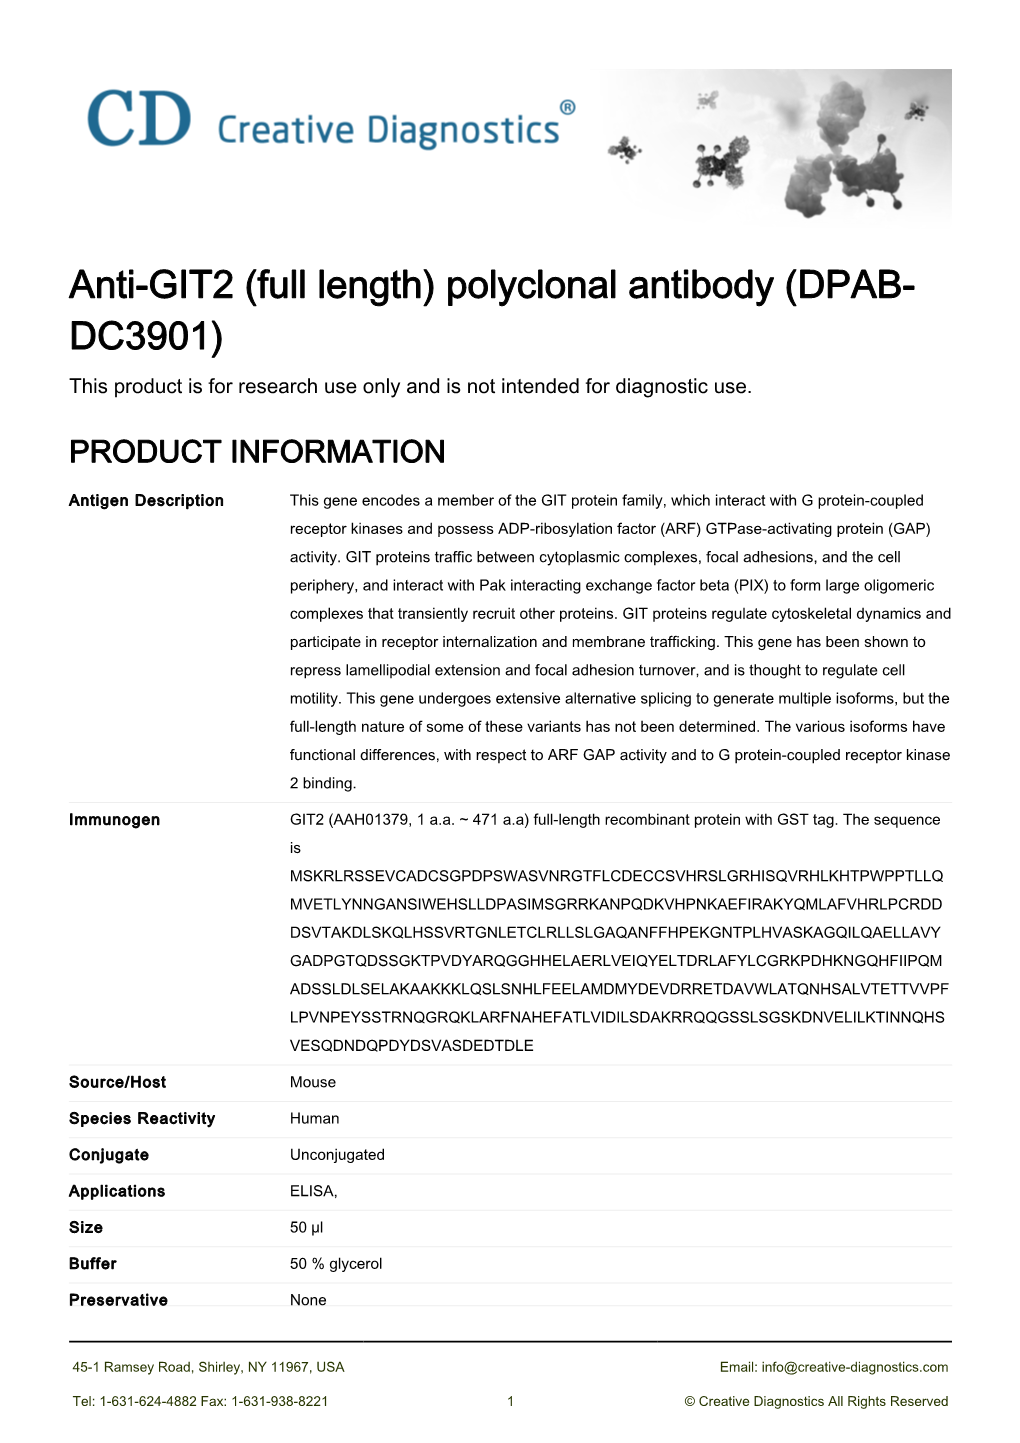 Anti-GIT2 (Full Length) Polyclonal Antibody (DPAB- DC3901) This Product Is for Research Use Only and Is Not Intended for Diagnostic Use